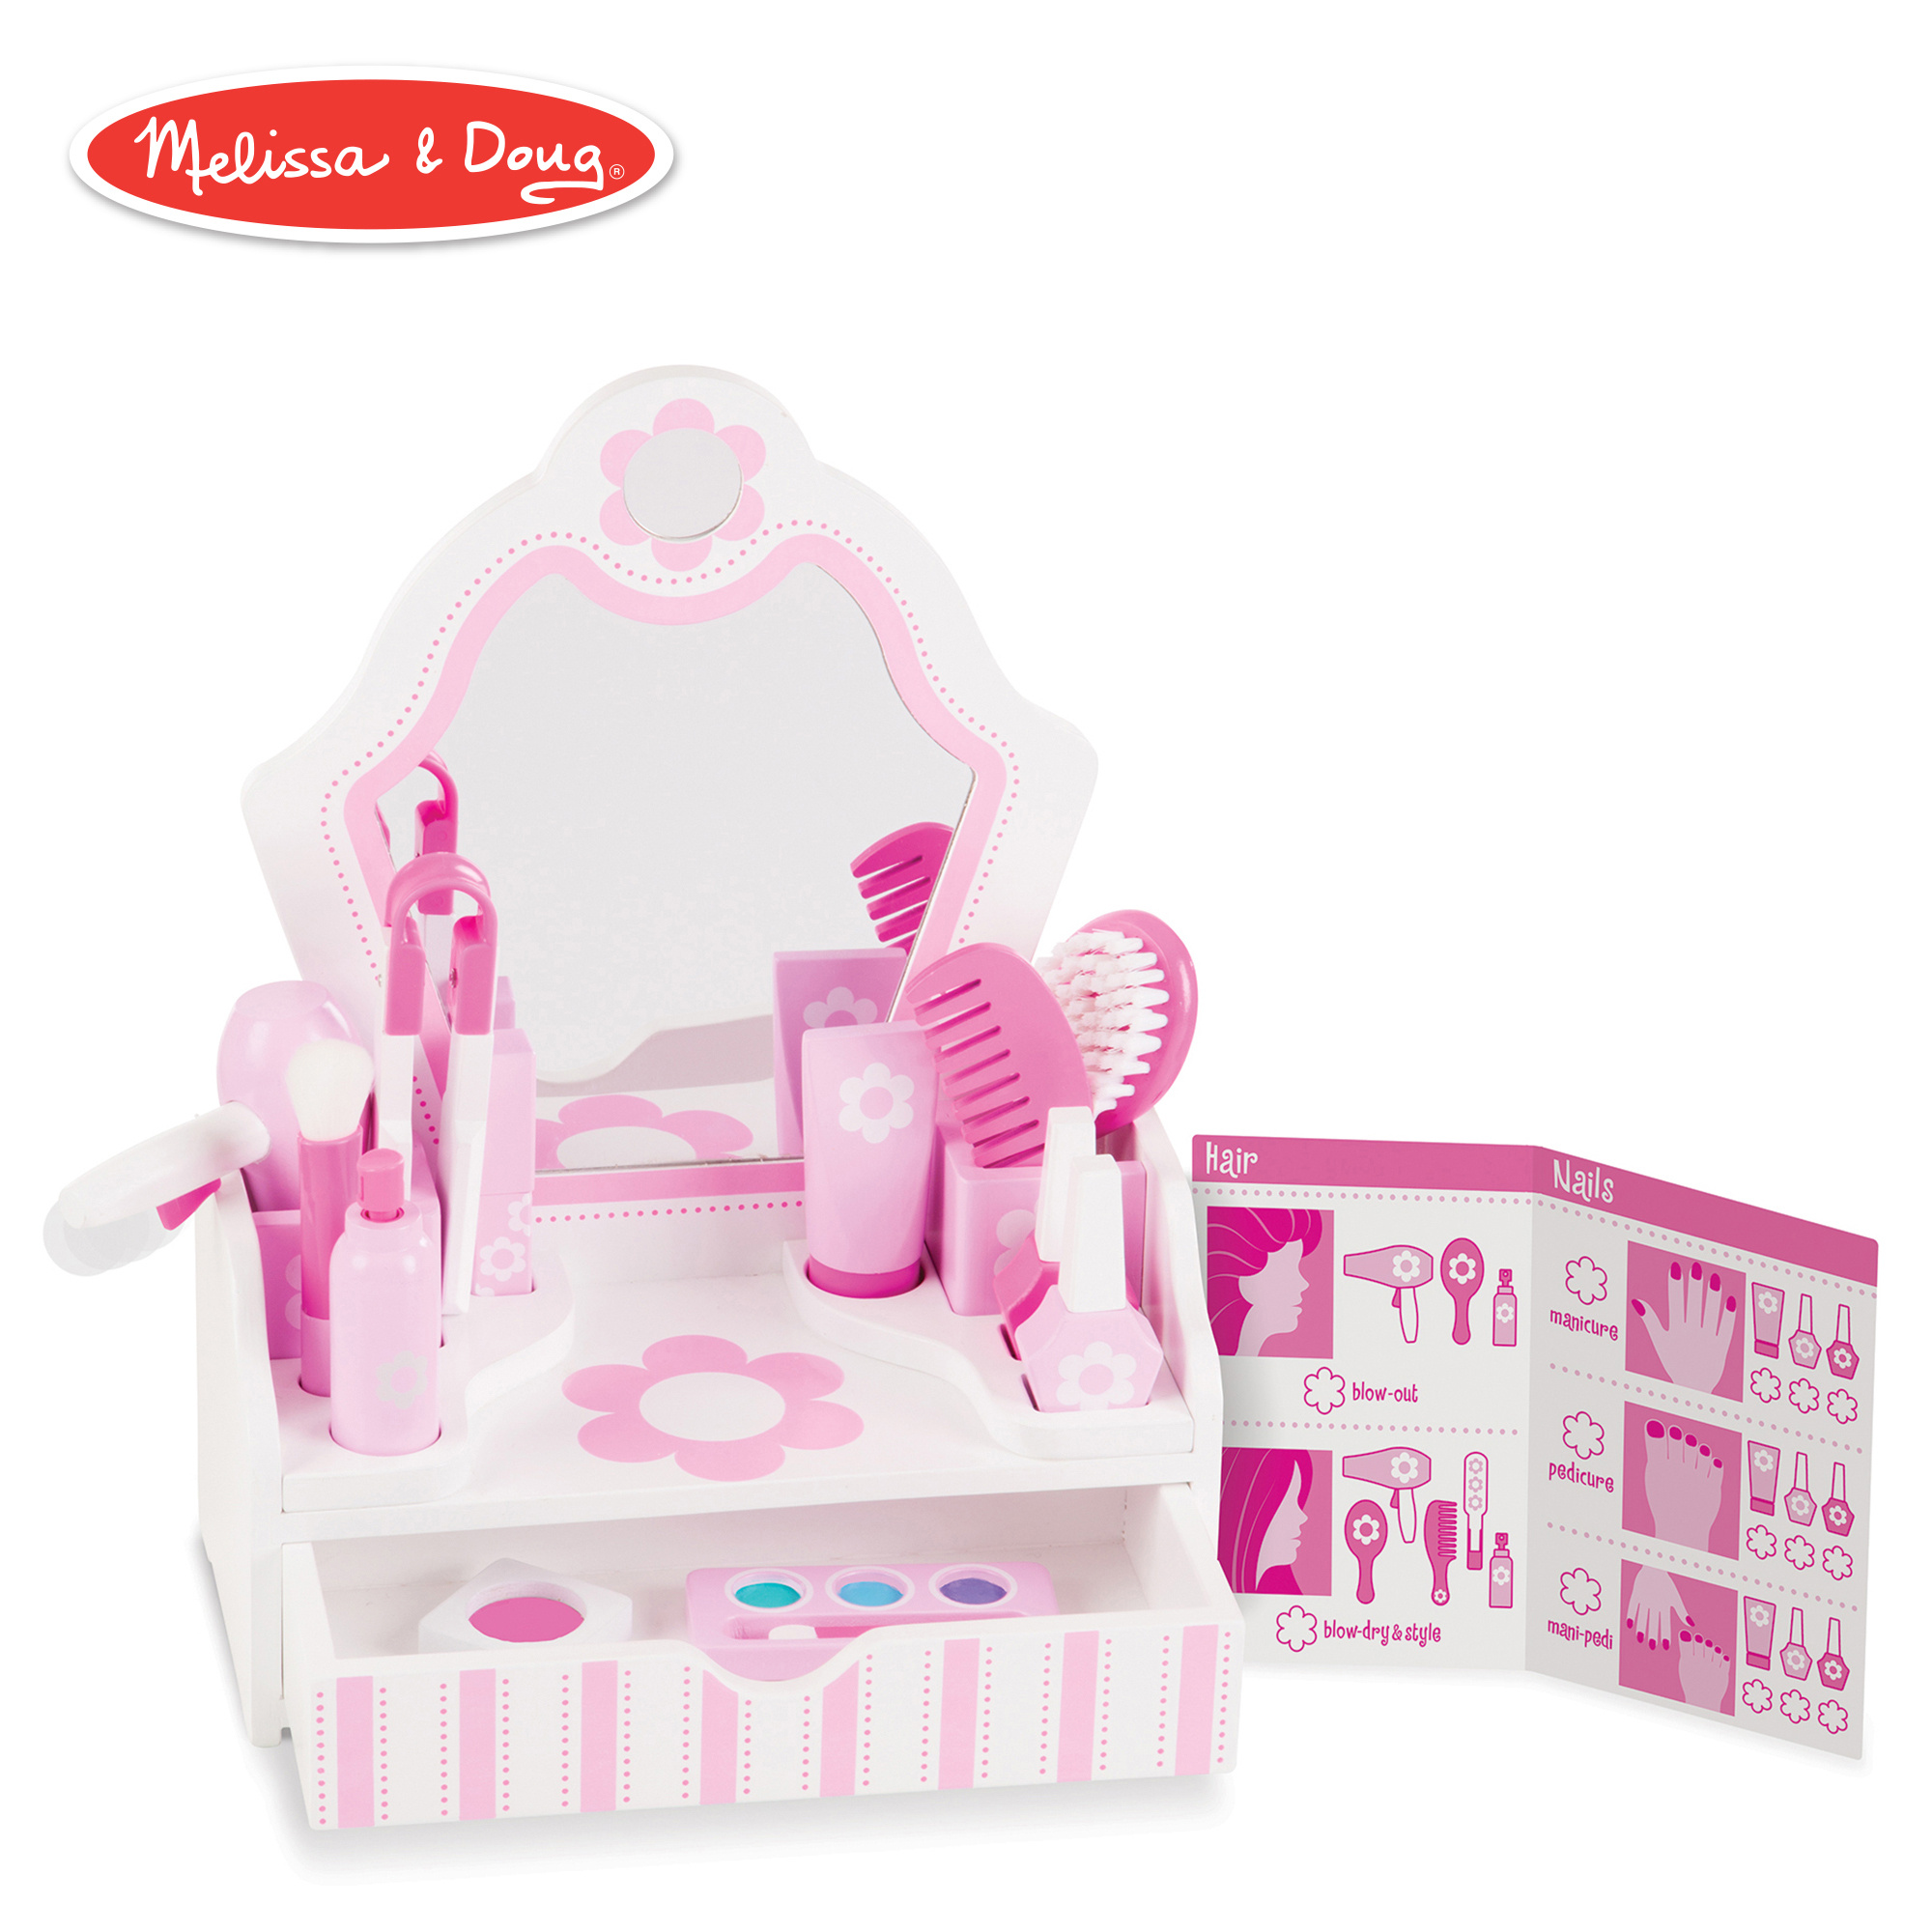 Wooden Beauty Salon Play Set, Role Play, Vanity & Accessories, 18 Pieces, 15.5" H X 12" W X 6" L